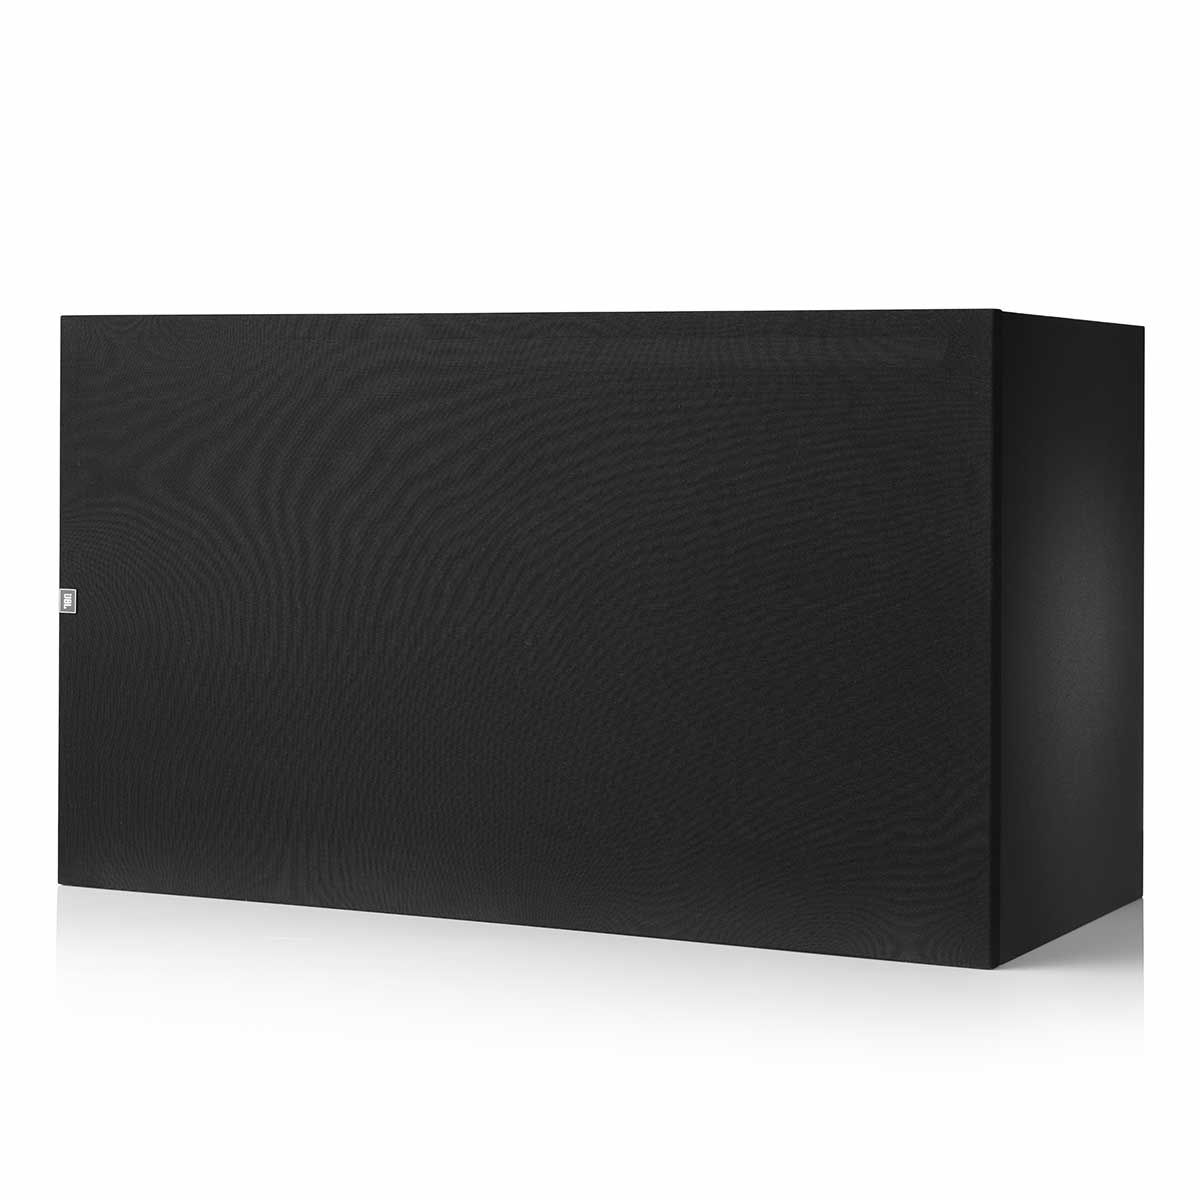 JBL Synthesis SSW-2 Dual Subwoofer, Black, horizontal position, front view with grille